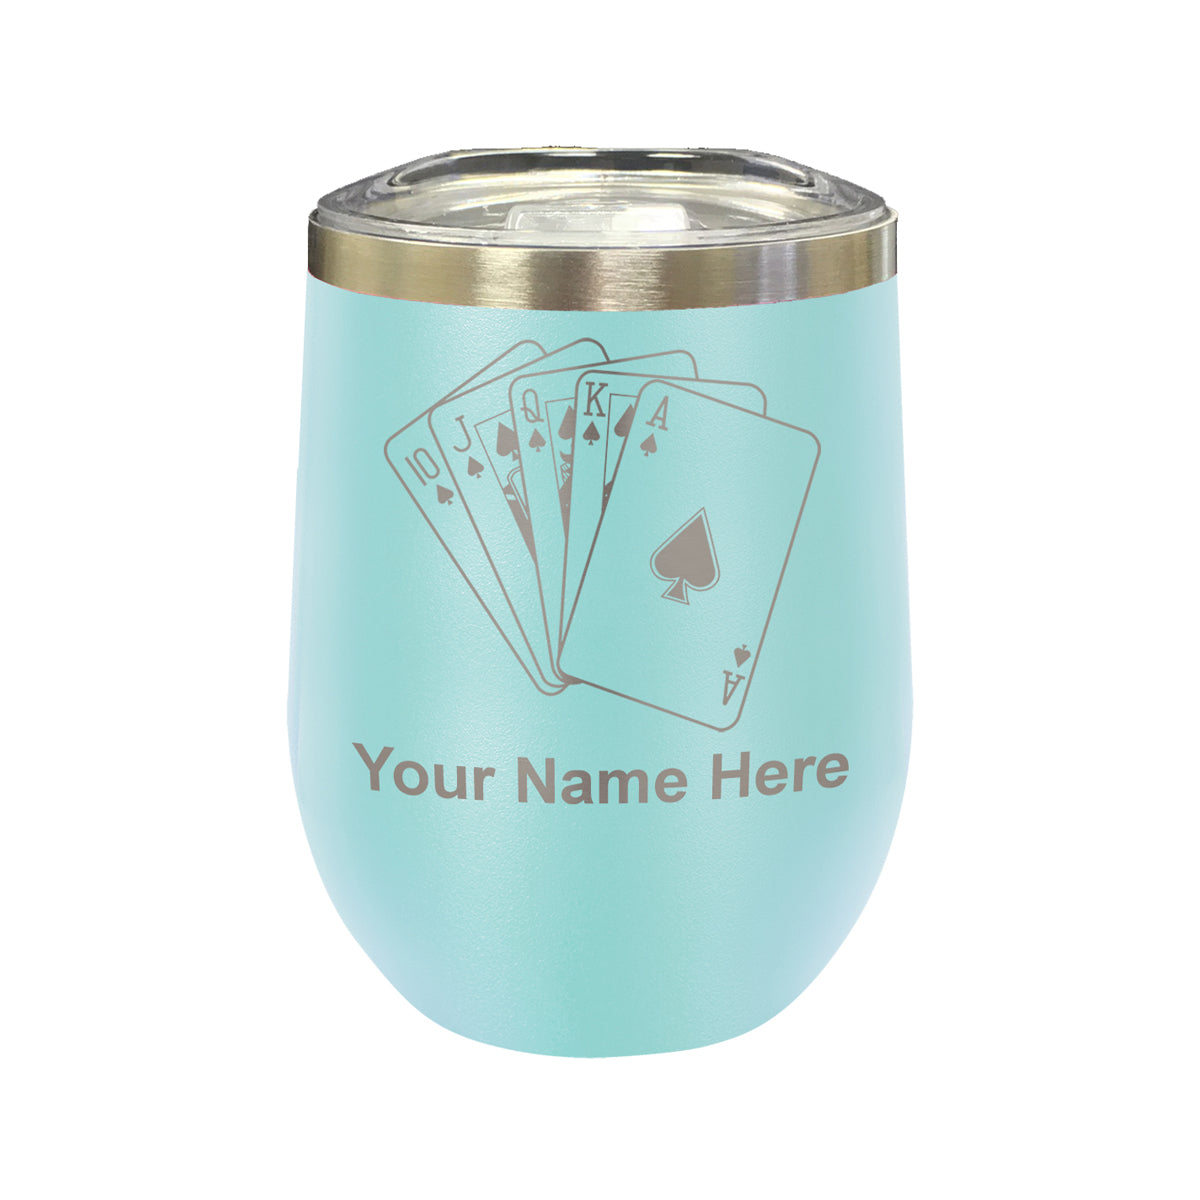 LaserGram Double Wall Stainless Steel Wine Glass, Royal Flush Poker Cards, Personalized Engraving Included